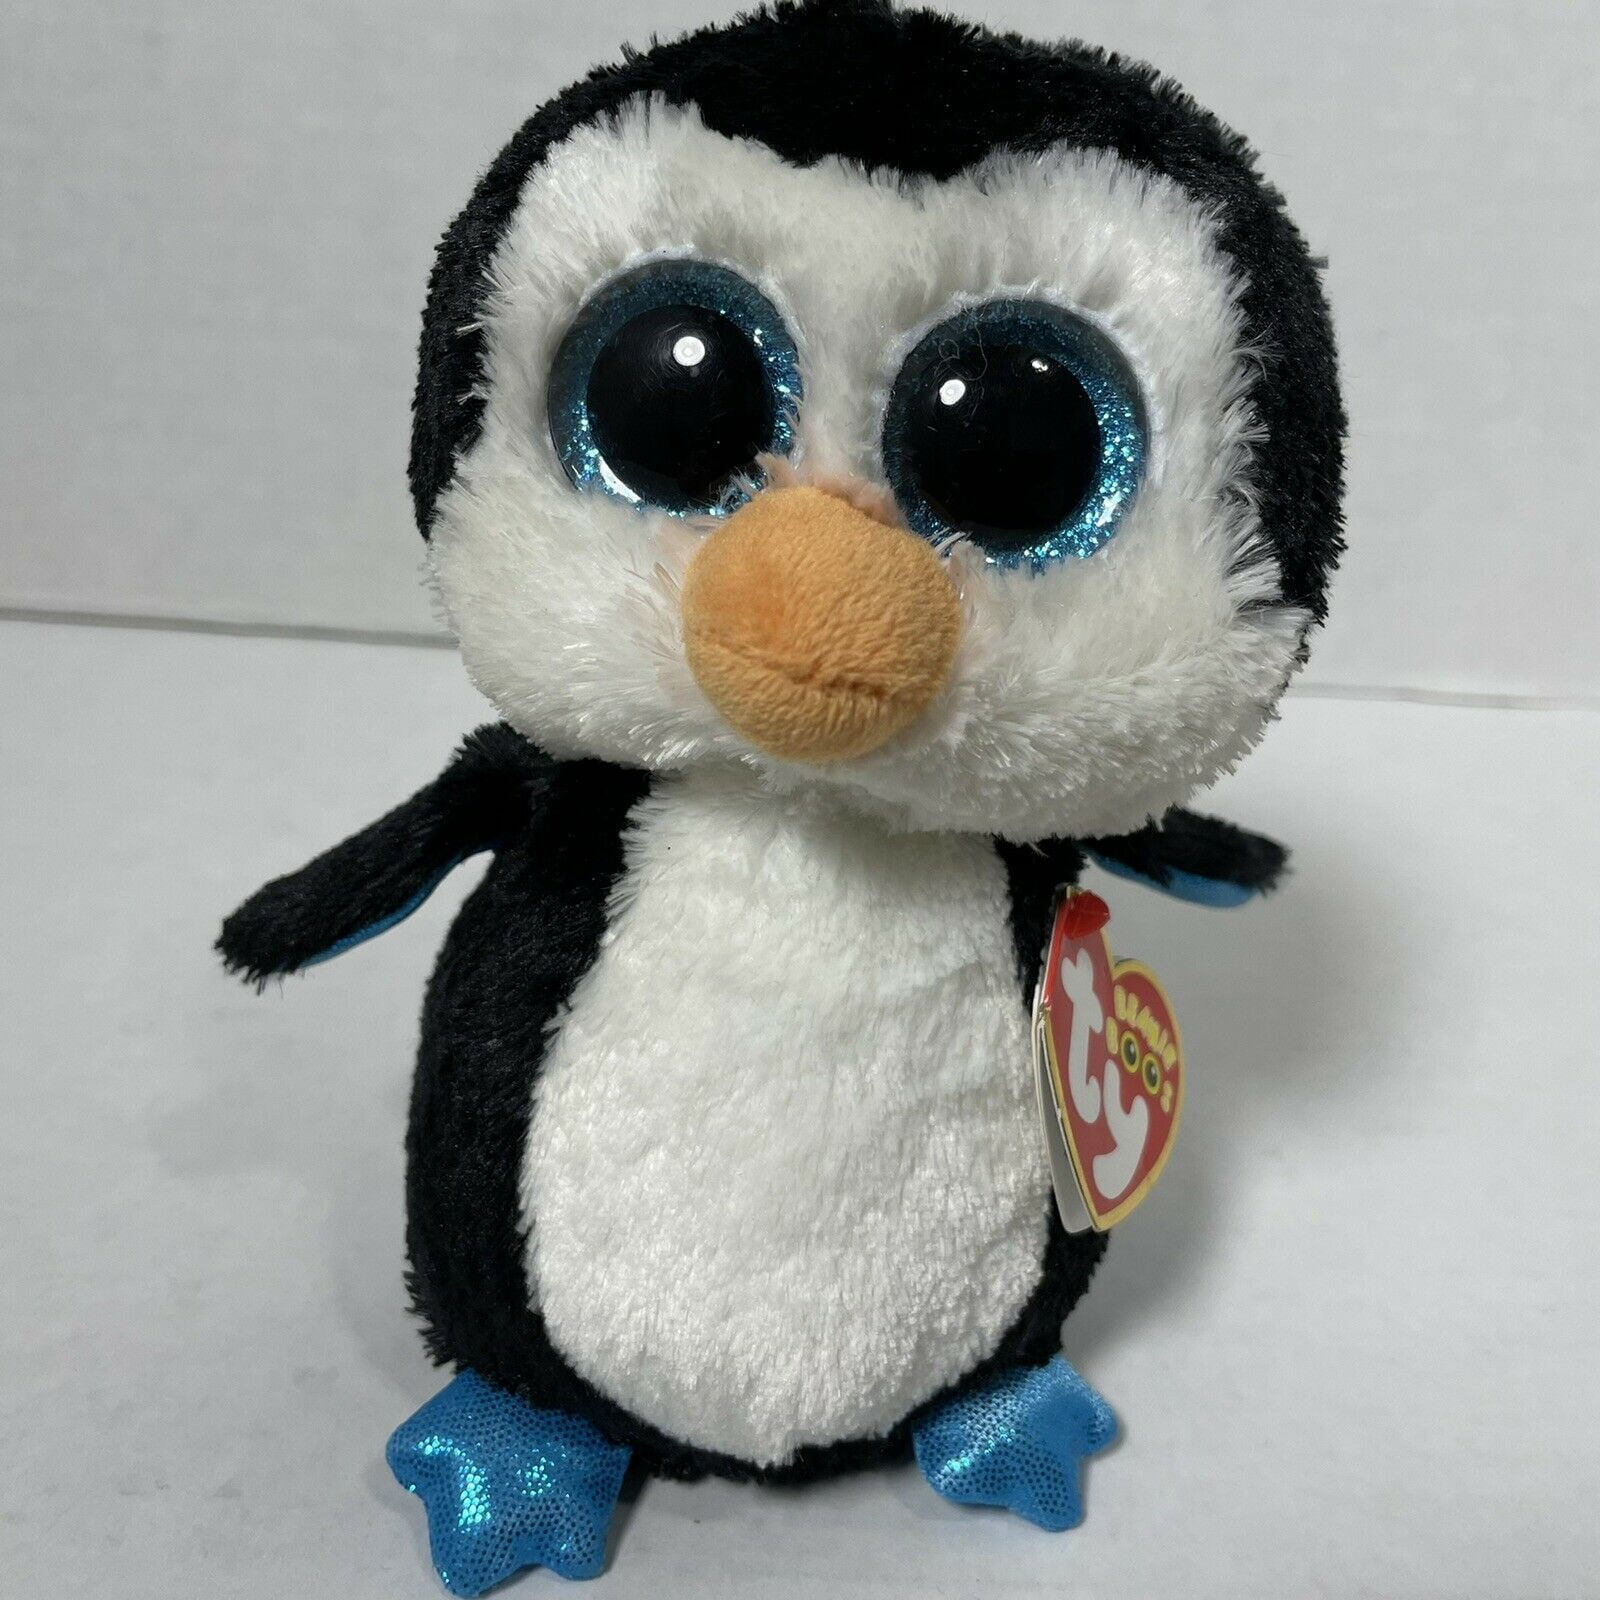 Details about   TY BEANIE BABY BOO BOOS STUFFED PLUSH WADDLES PENGUIN 2009 6" BIG BLUE EYES NWT 